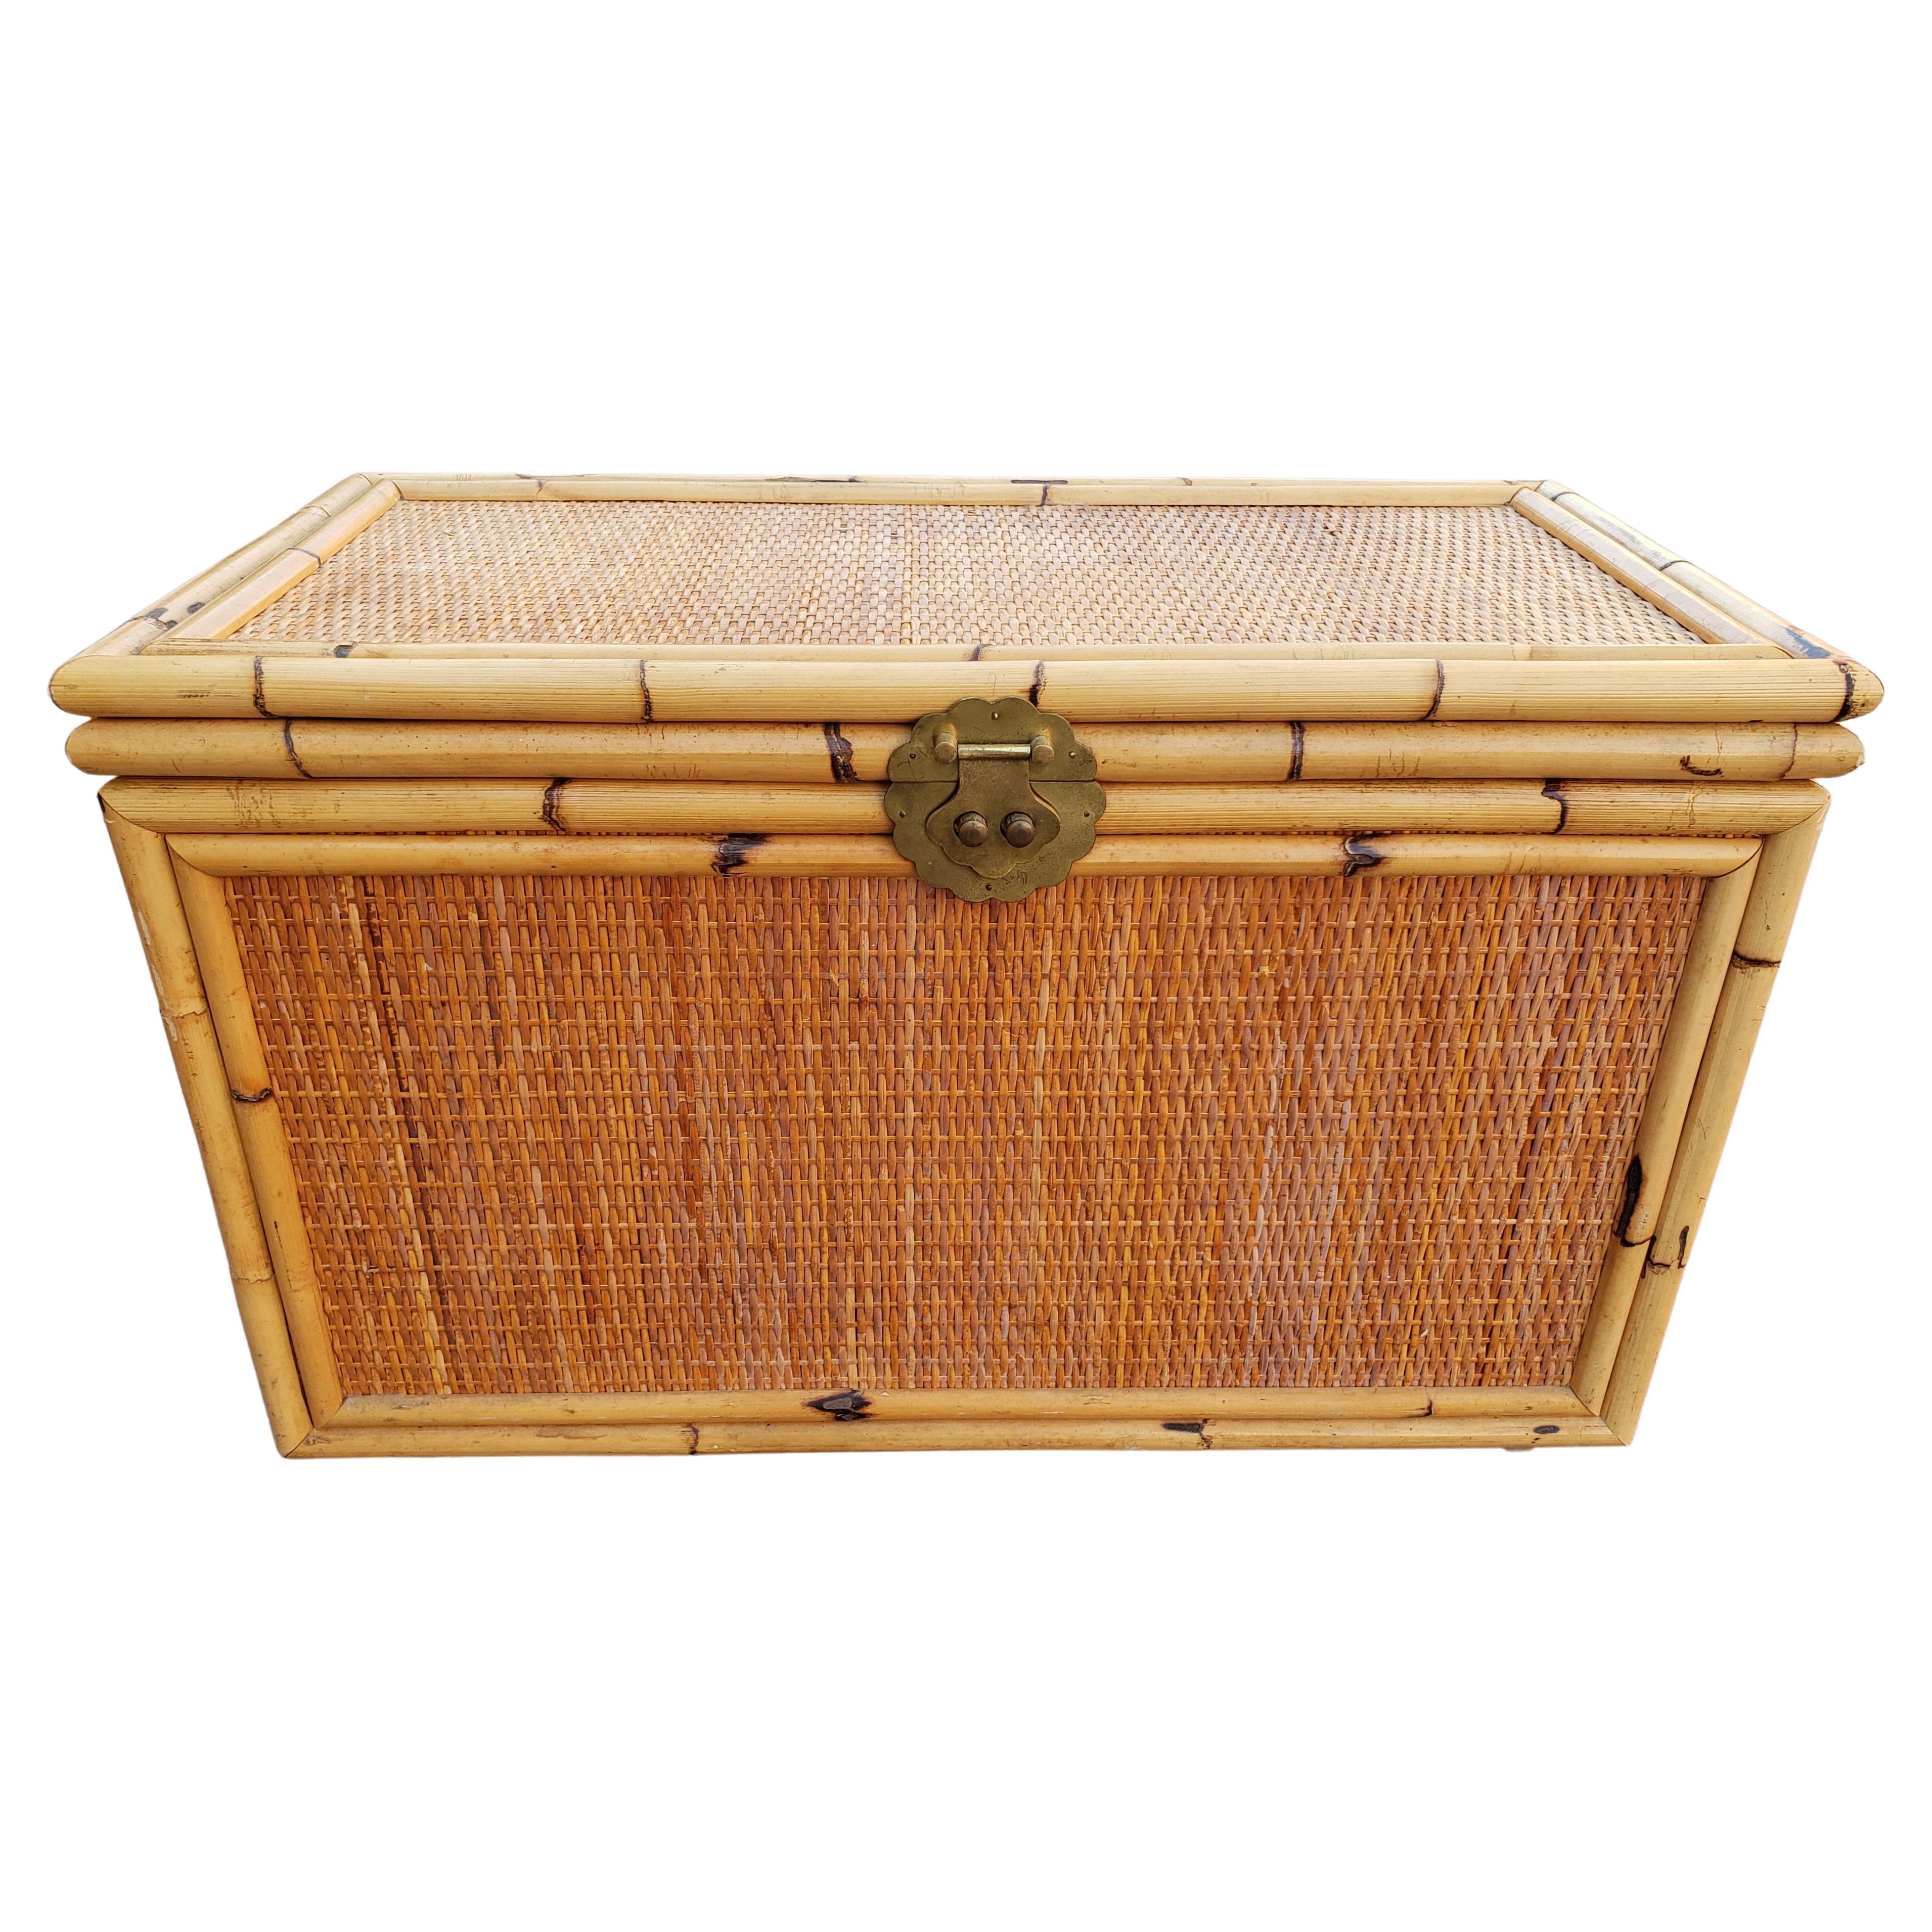 McGuire Style Woven Rattan Bamboo Wicker Storage Trunk